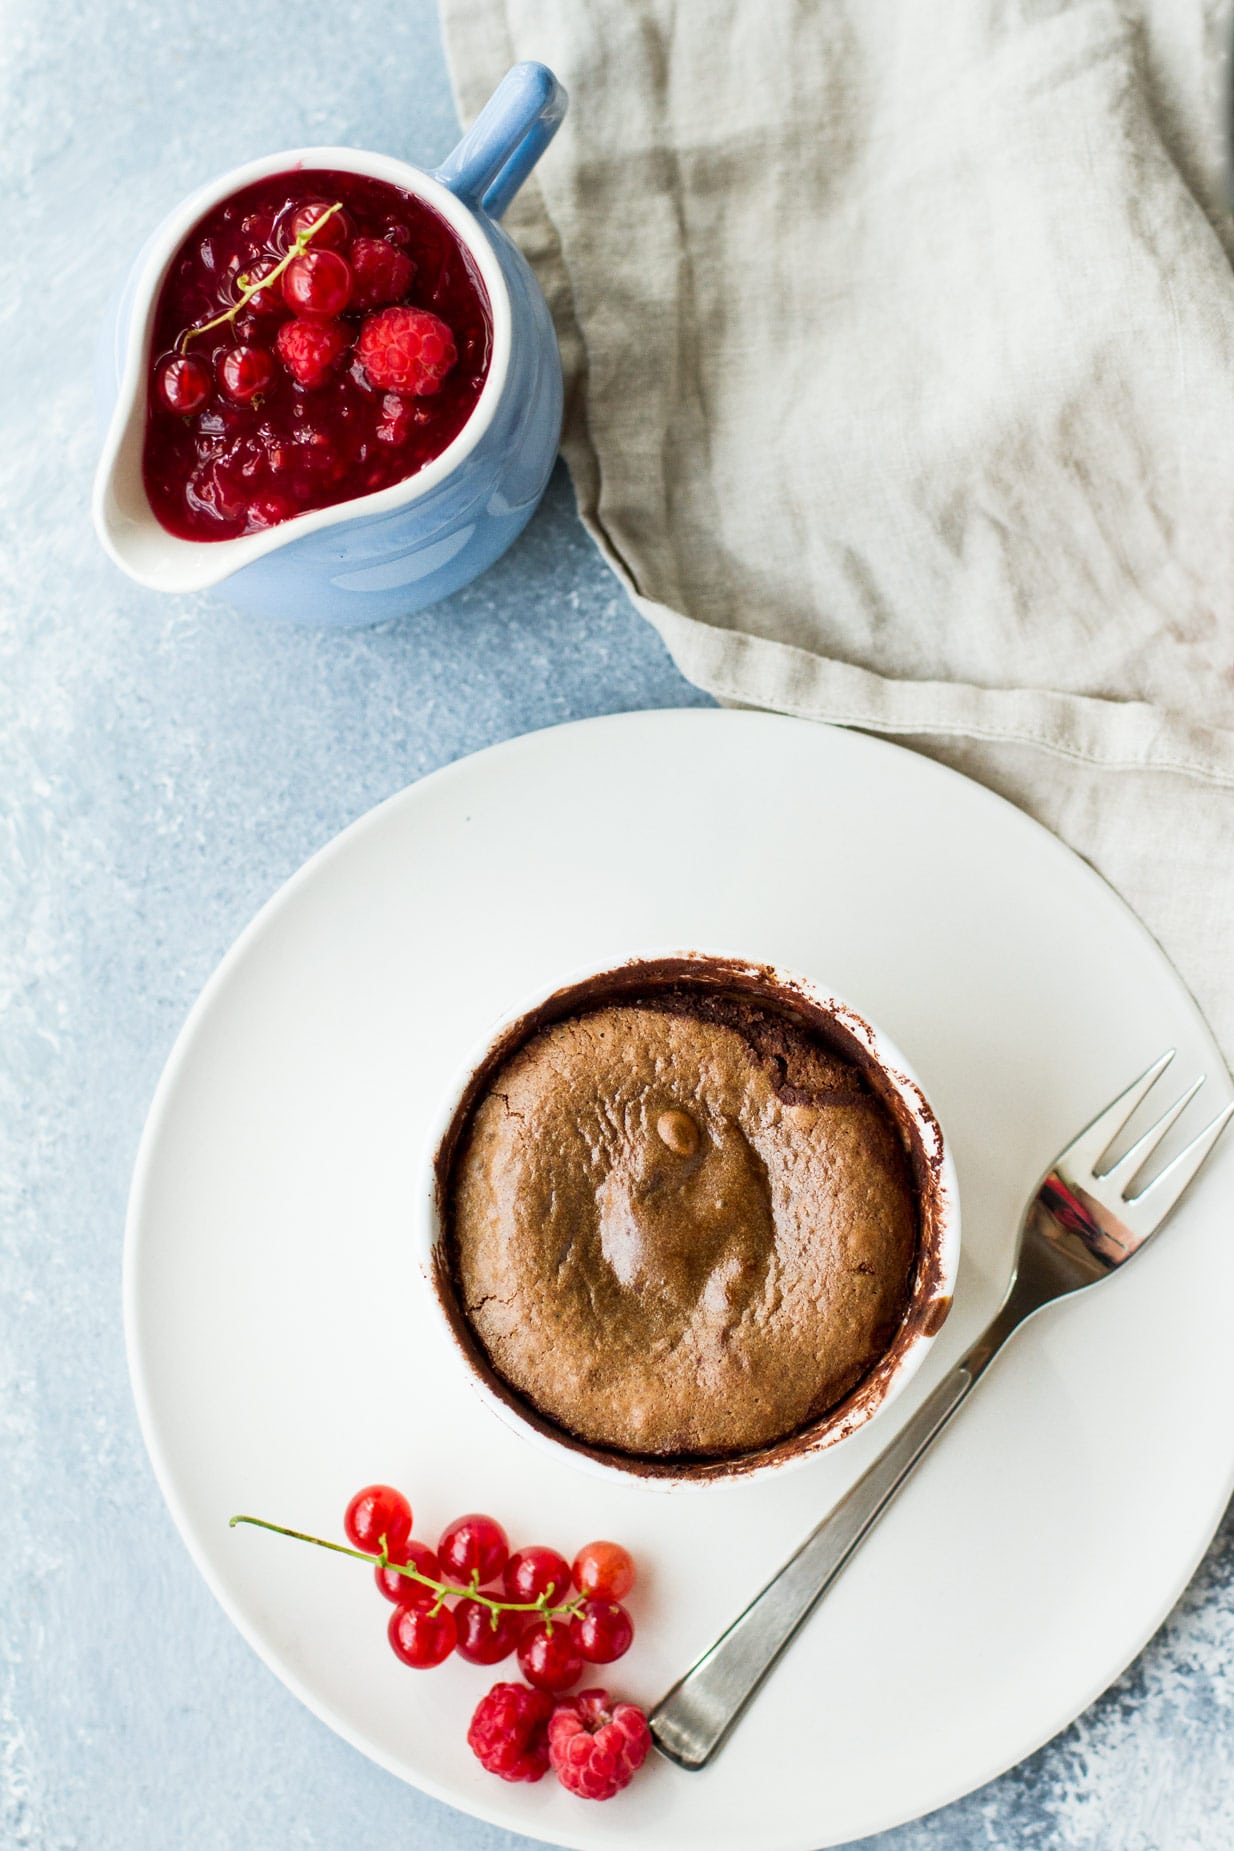 Chocolate Lava Cake with a Raspberry Red Currant Sauce